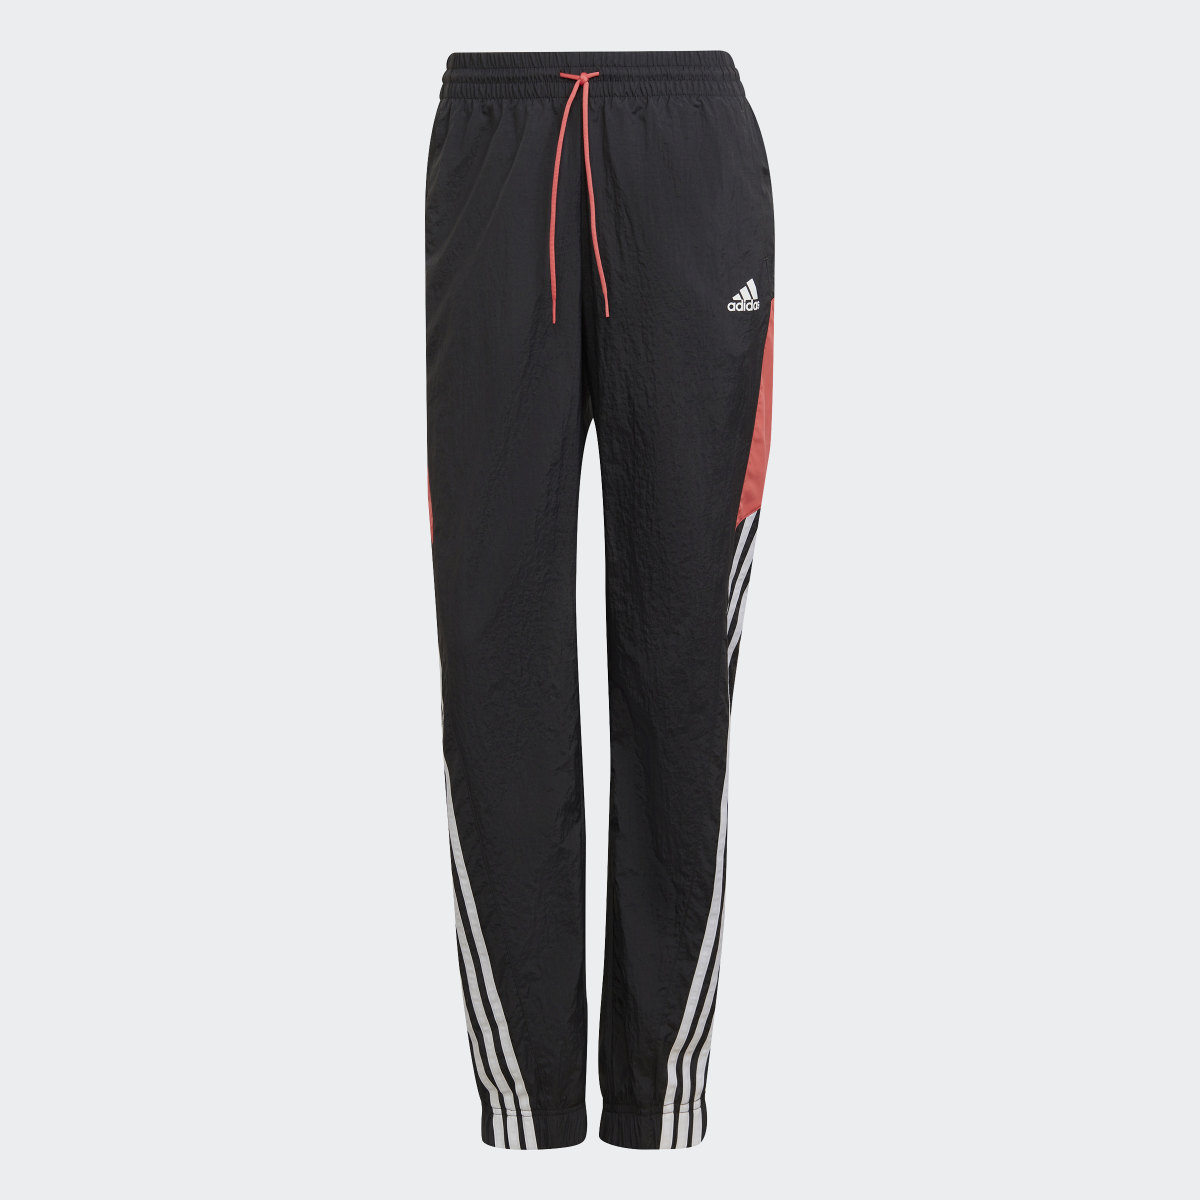 Adidas Sportswear Game Time Track Suit. 7